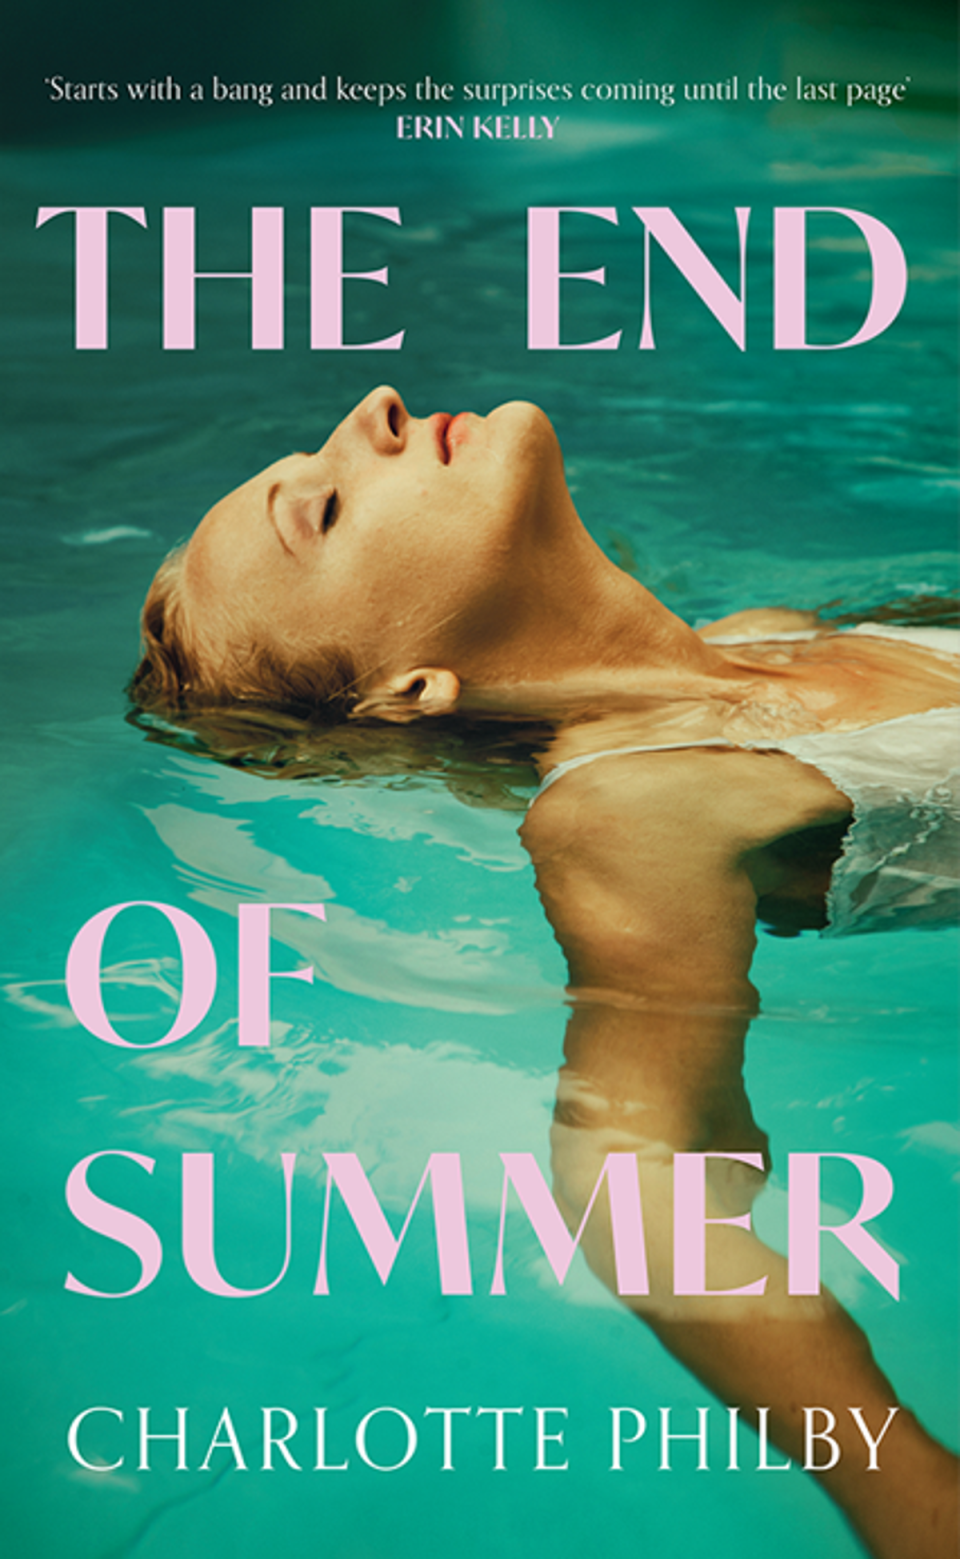 The End of Summer by Charlotte Philby (Harper Collins)